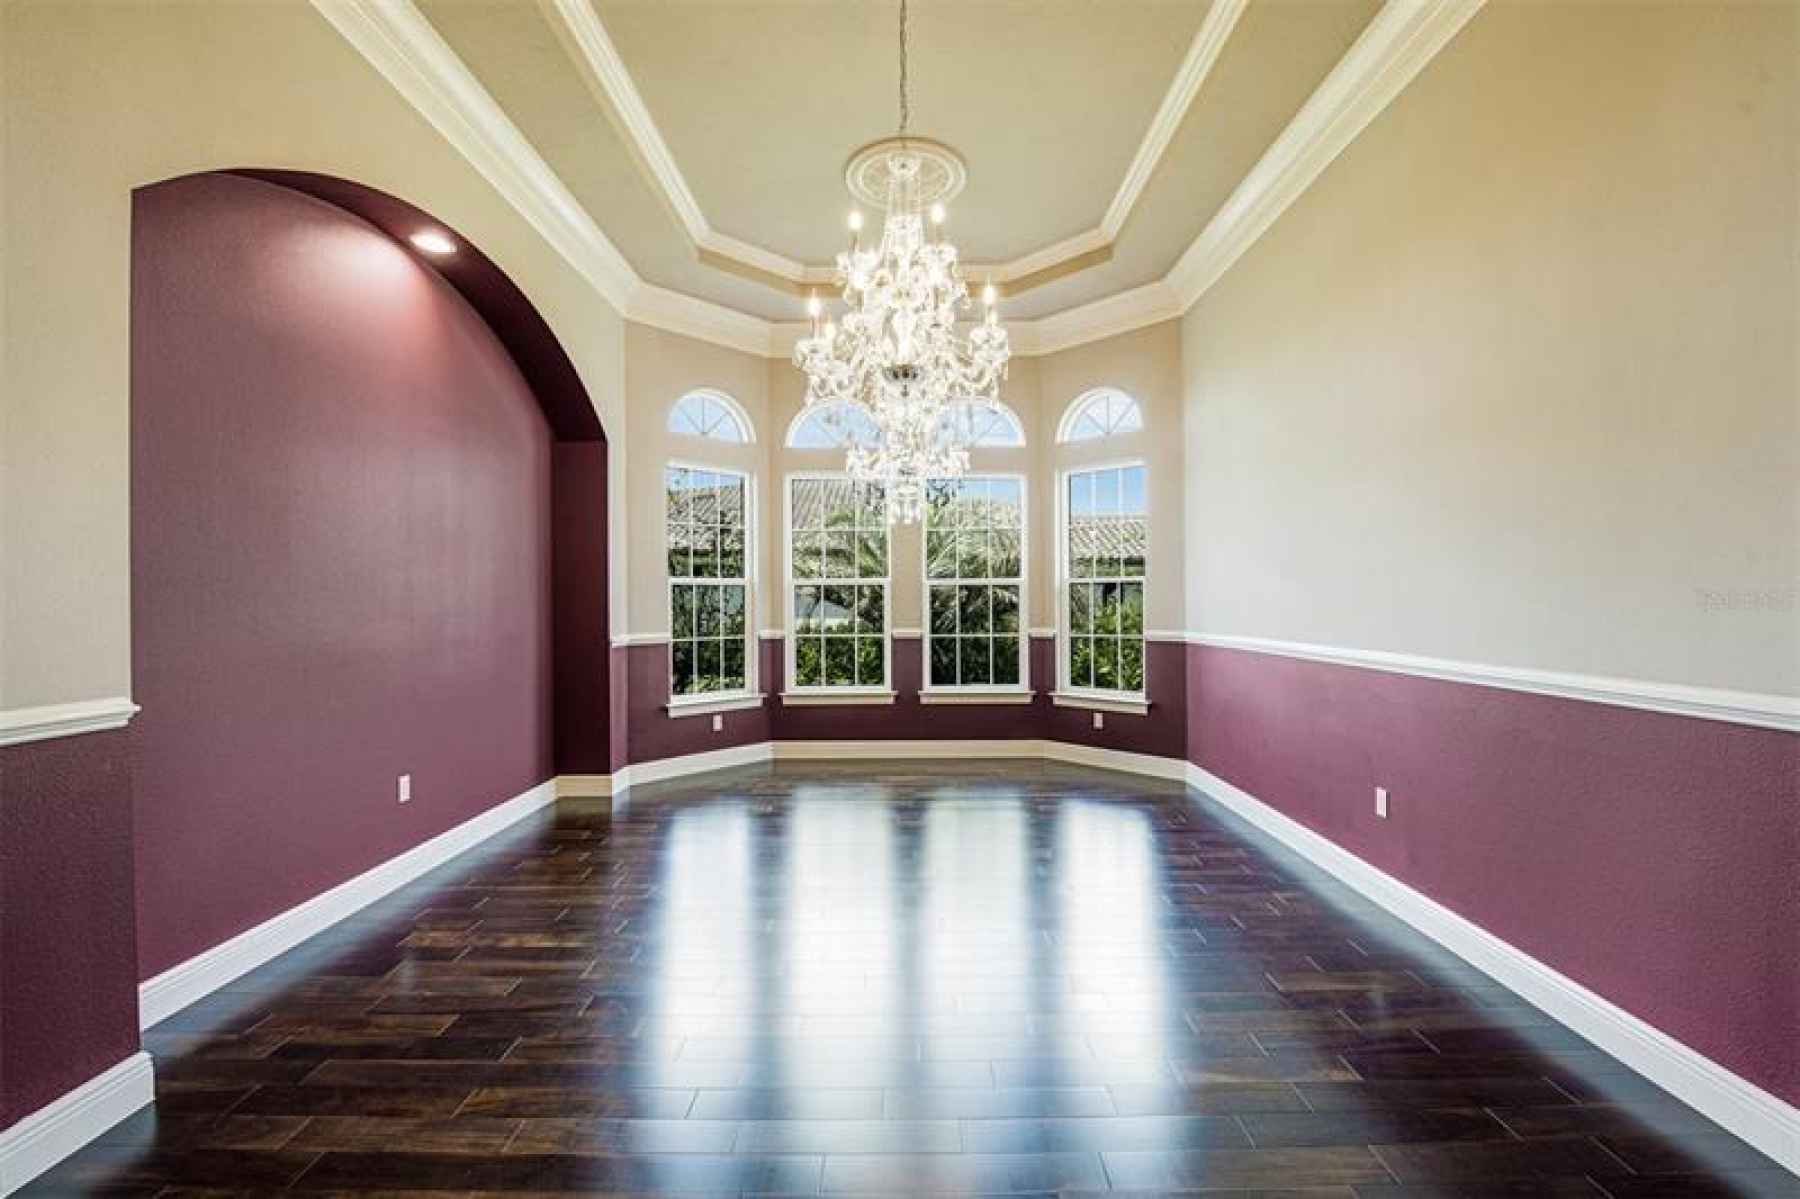 Dining room with bay windows, tray ceilings, and chandeliers